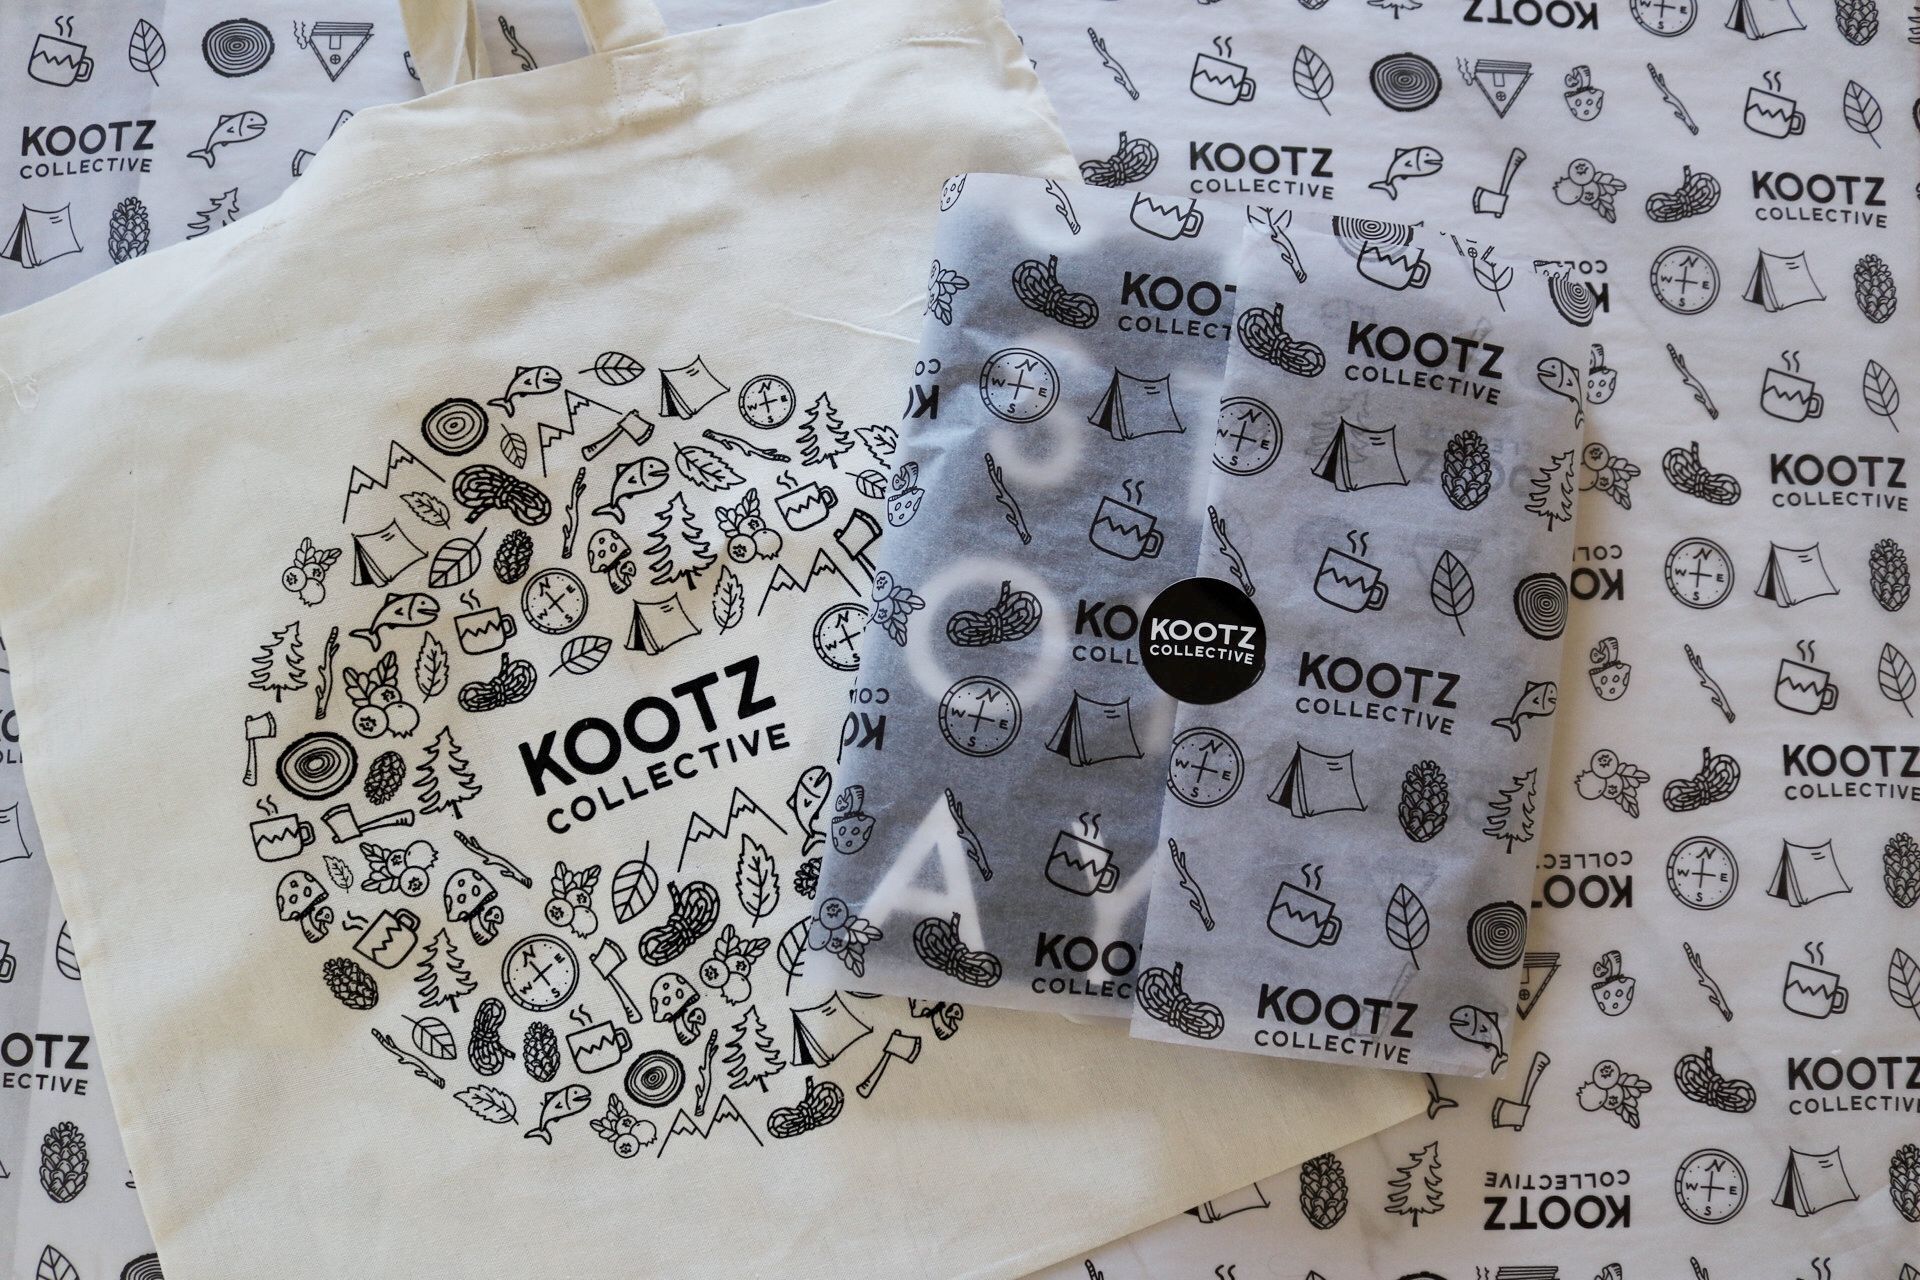 Kootz Collective: Celebrating Their Roots with Apparel and Goods